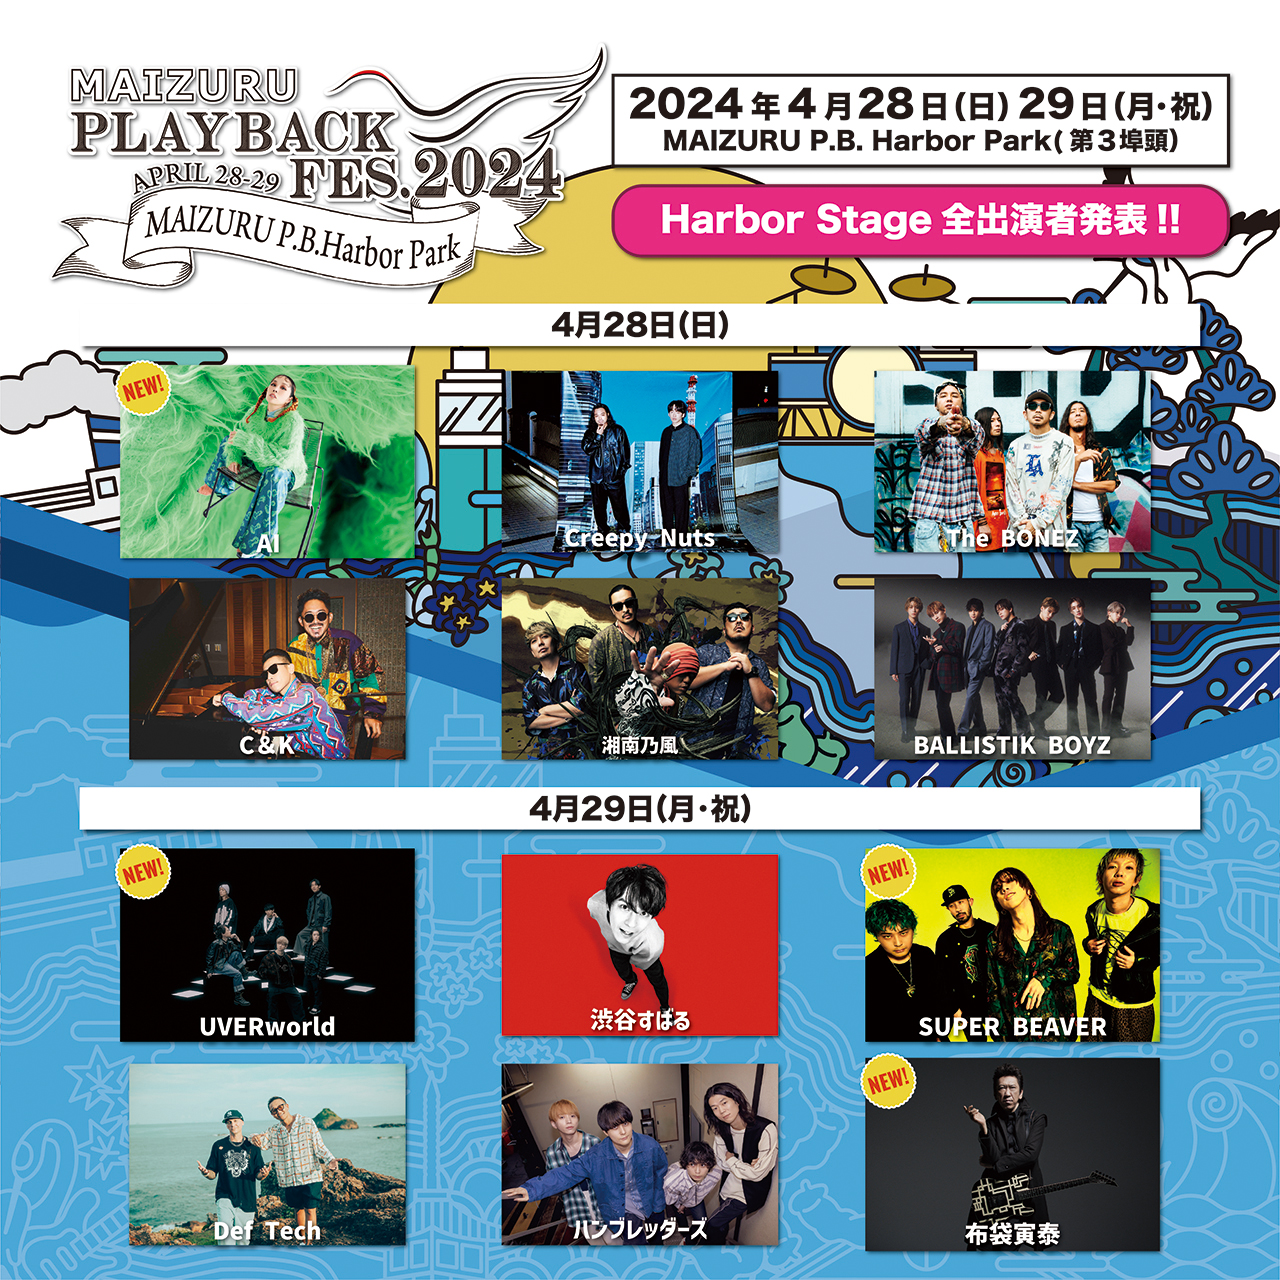 Harbor Stageに出演の全アーティスト発表！！